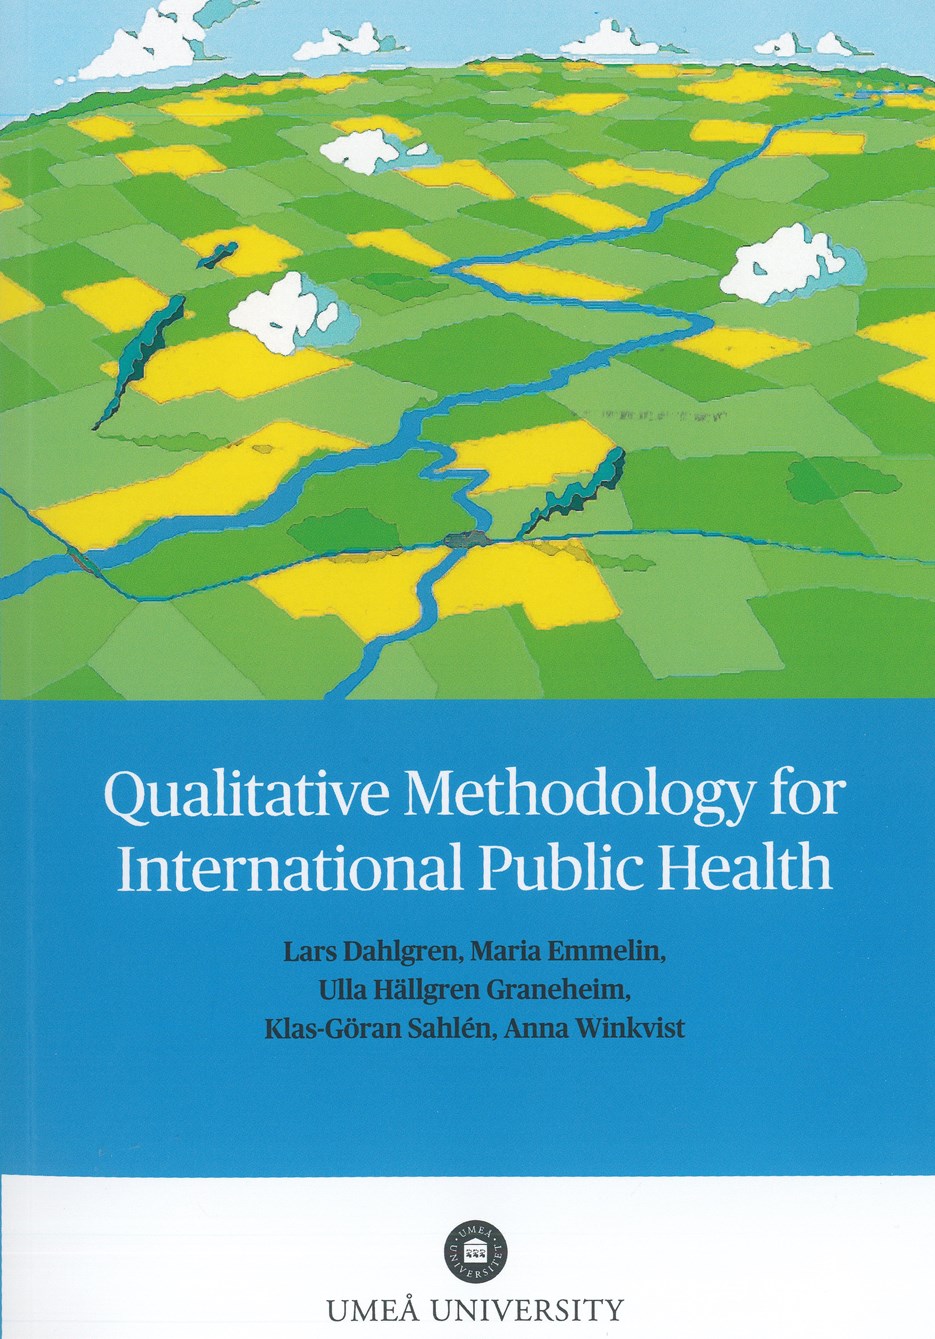 Cover of course book in qualitative methods